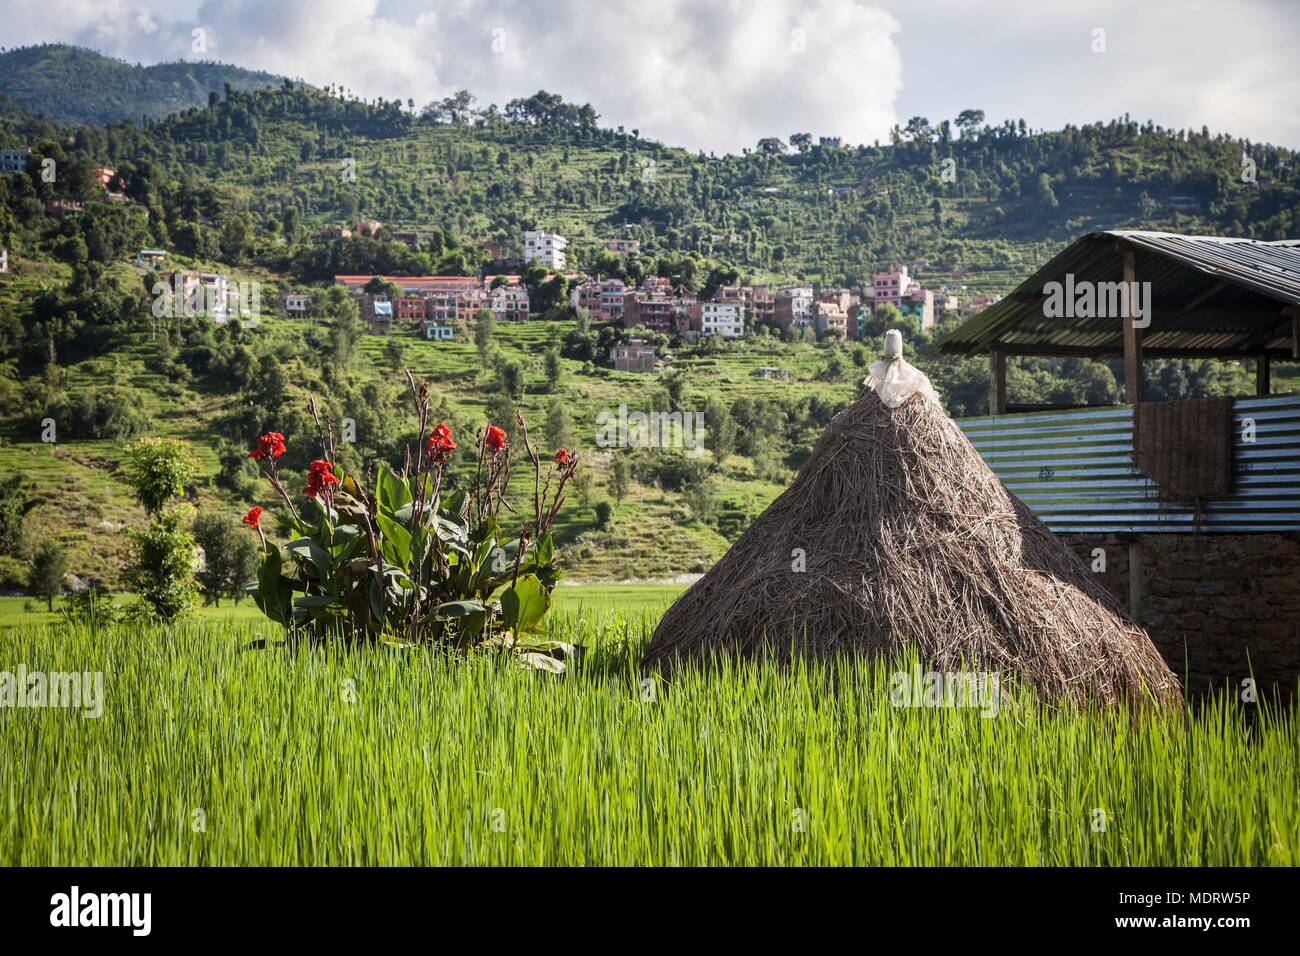 A haystack and barn in the middle of rice paddies, in the Dhading District of Nepal Stock Photo